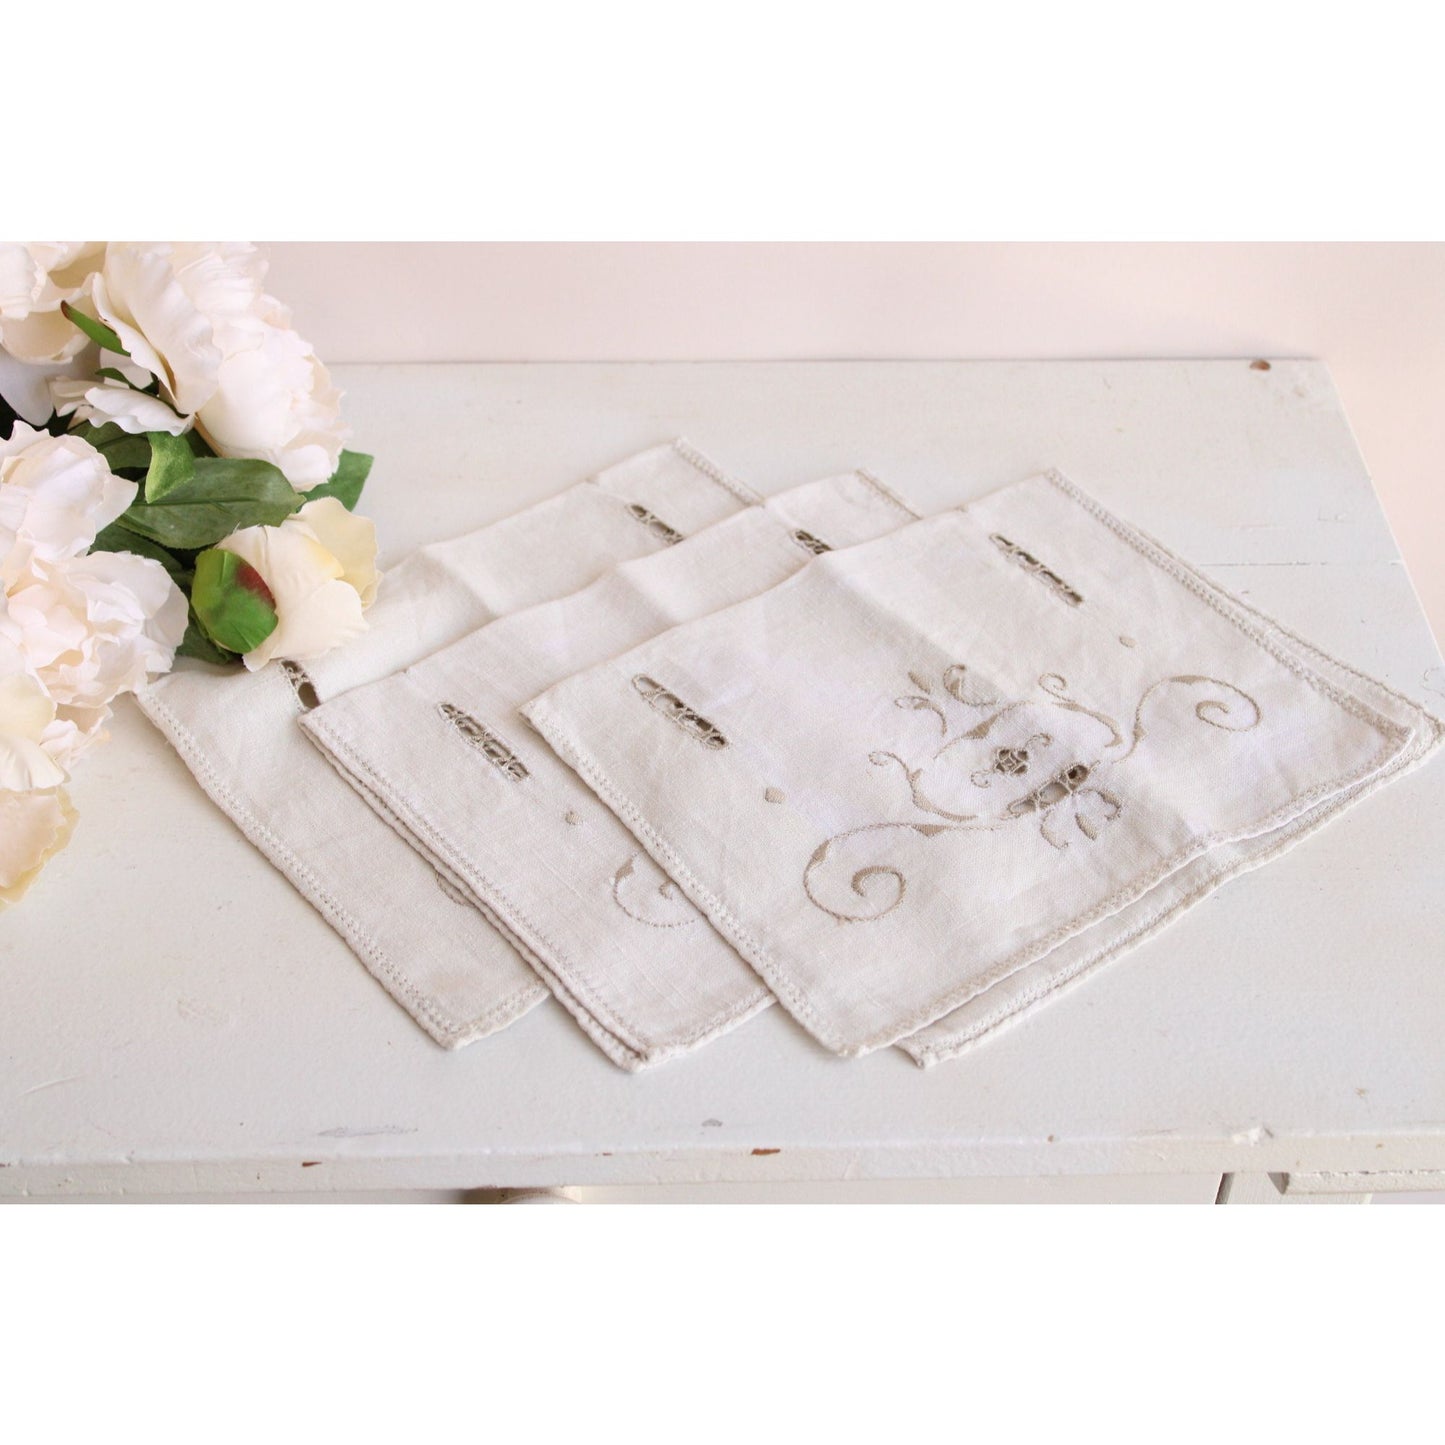 Vintage Set of Three 1930s Embroidered Linen Placemats